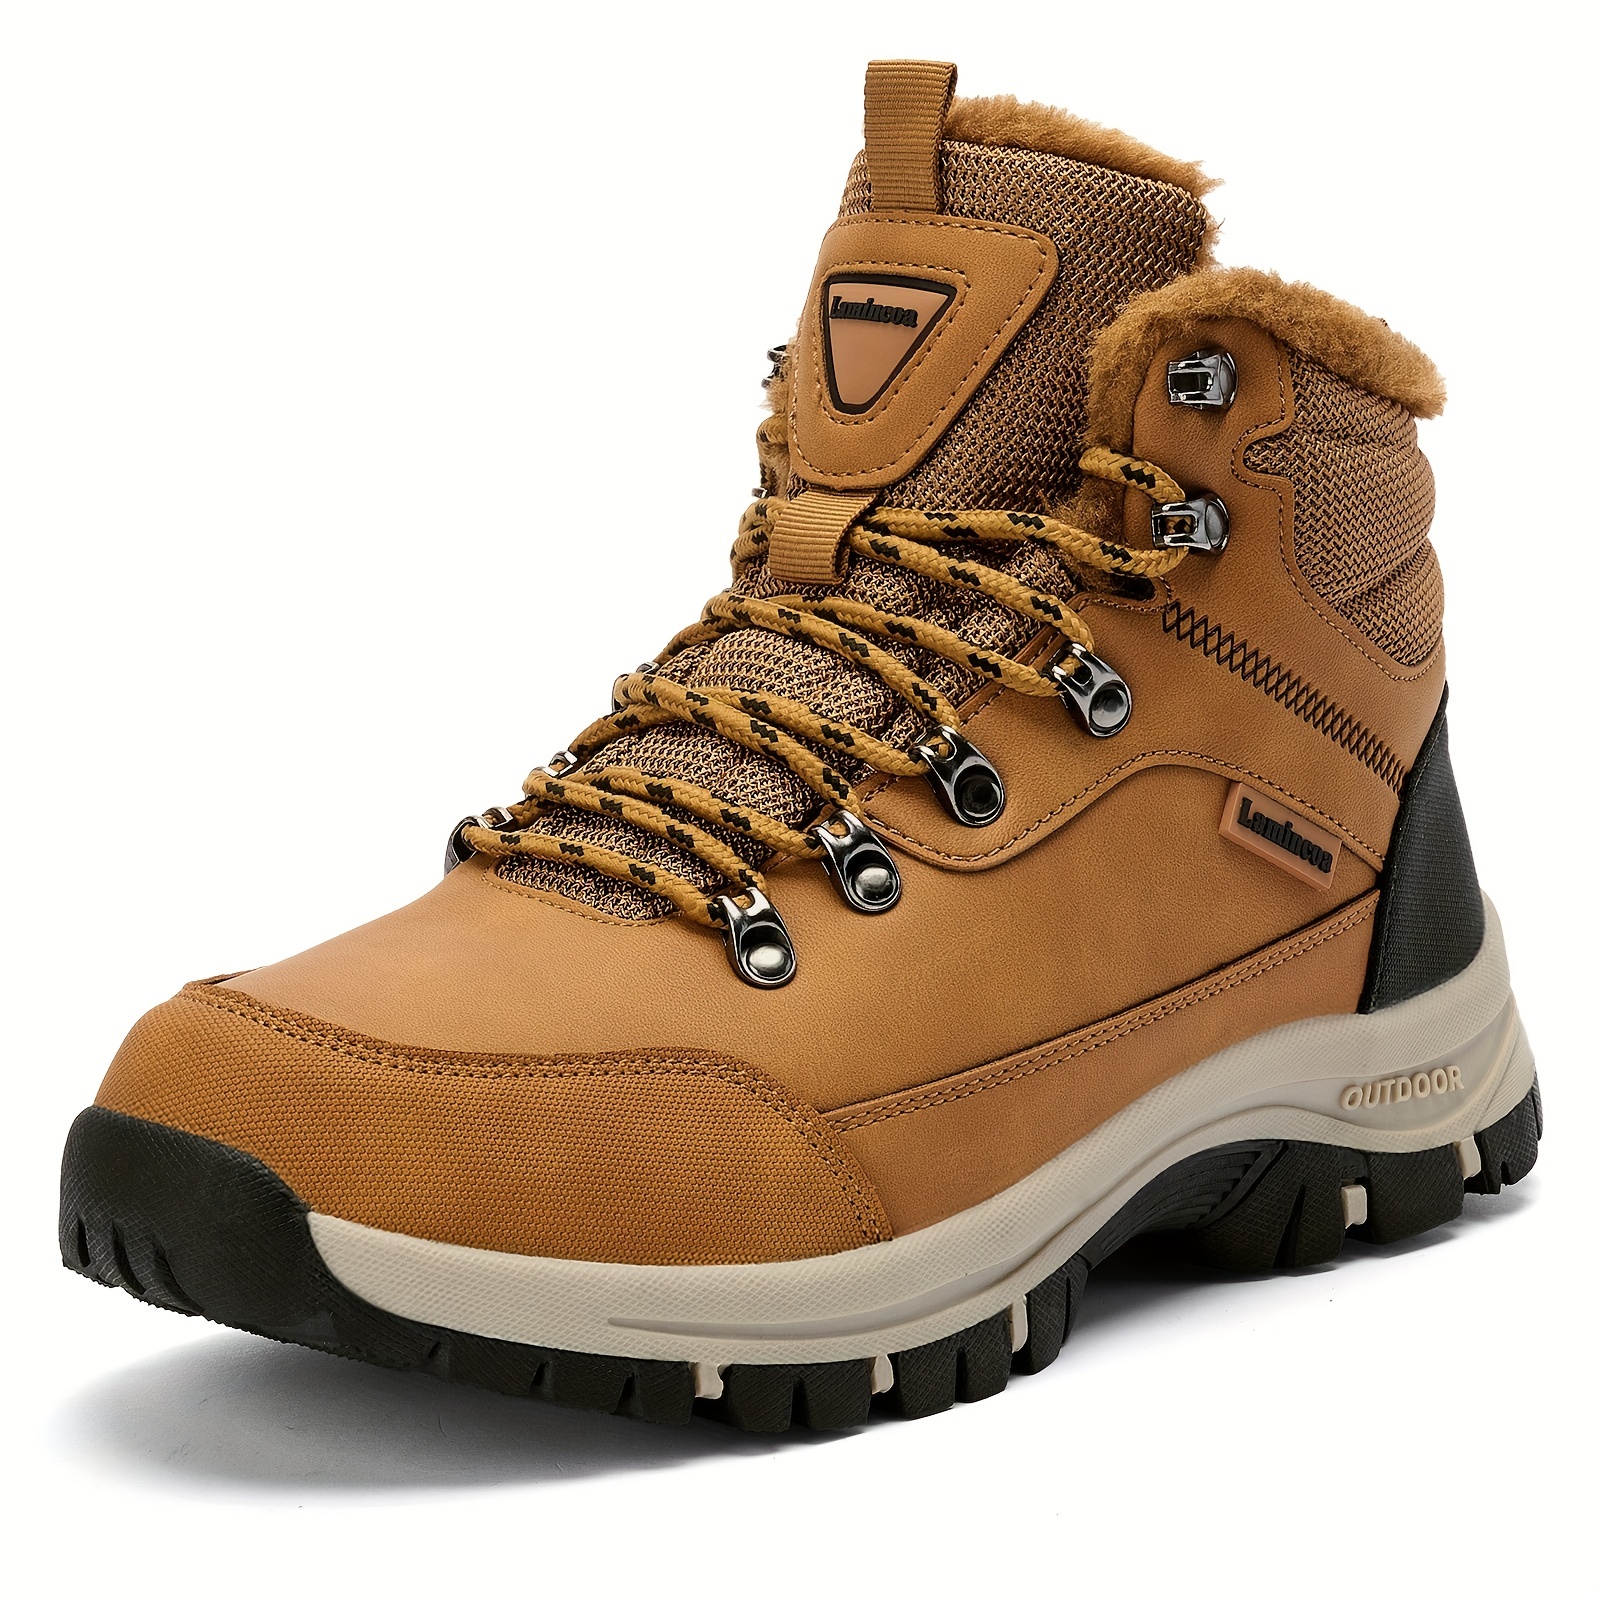 Shop Temu For Men's Snow Boots - Free Returns Within 90 Days - Temu